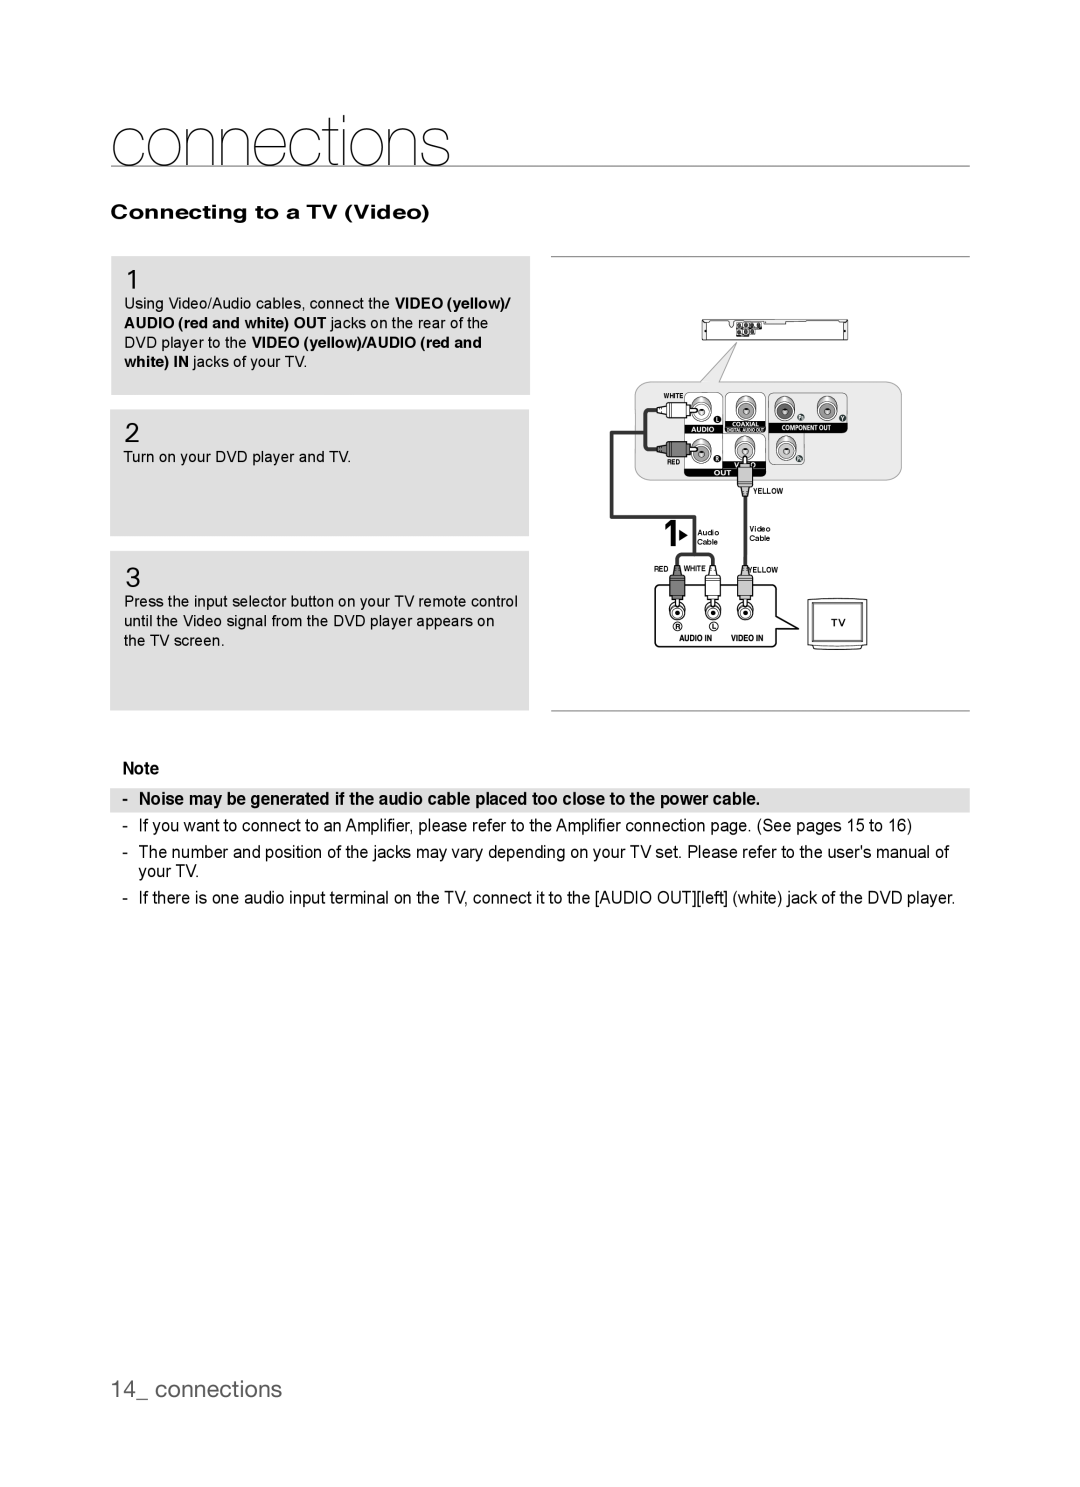 Samsung DVD-P390, AK68-01770G user manual connections, Connecting to a TV Video 